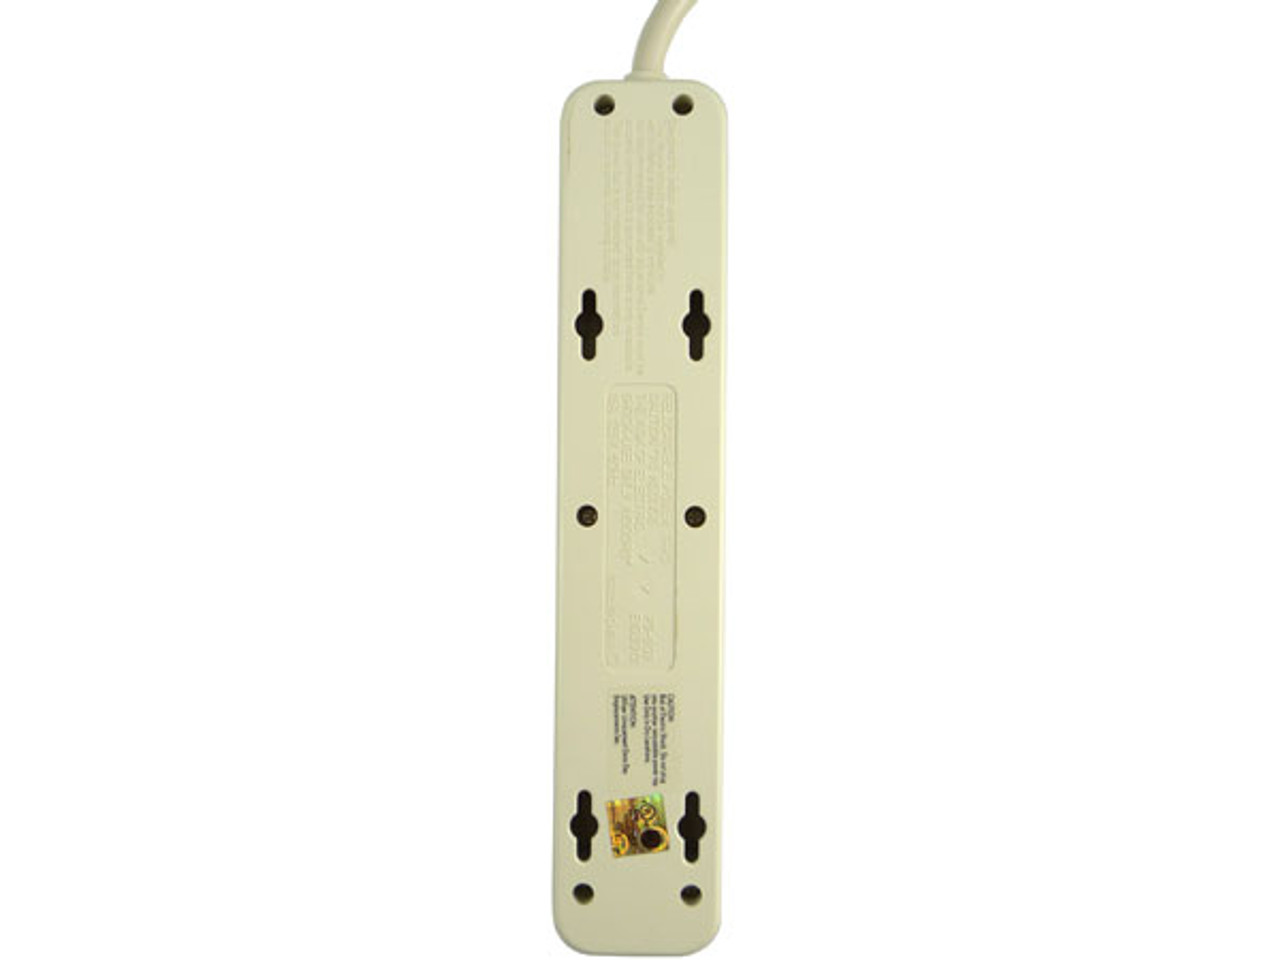 6 Outlet Child Protective Power Strip with 1 1/2 ft. Cord